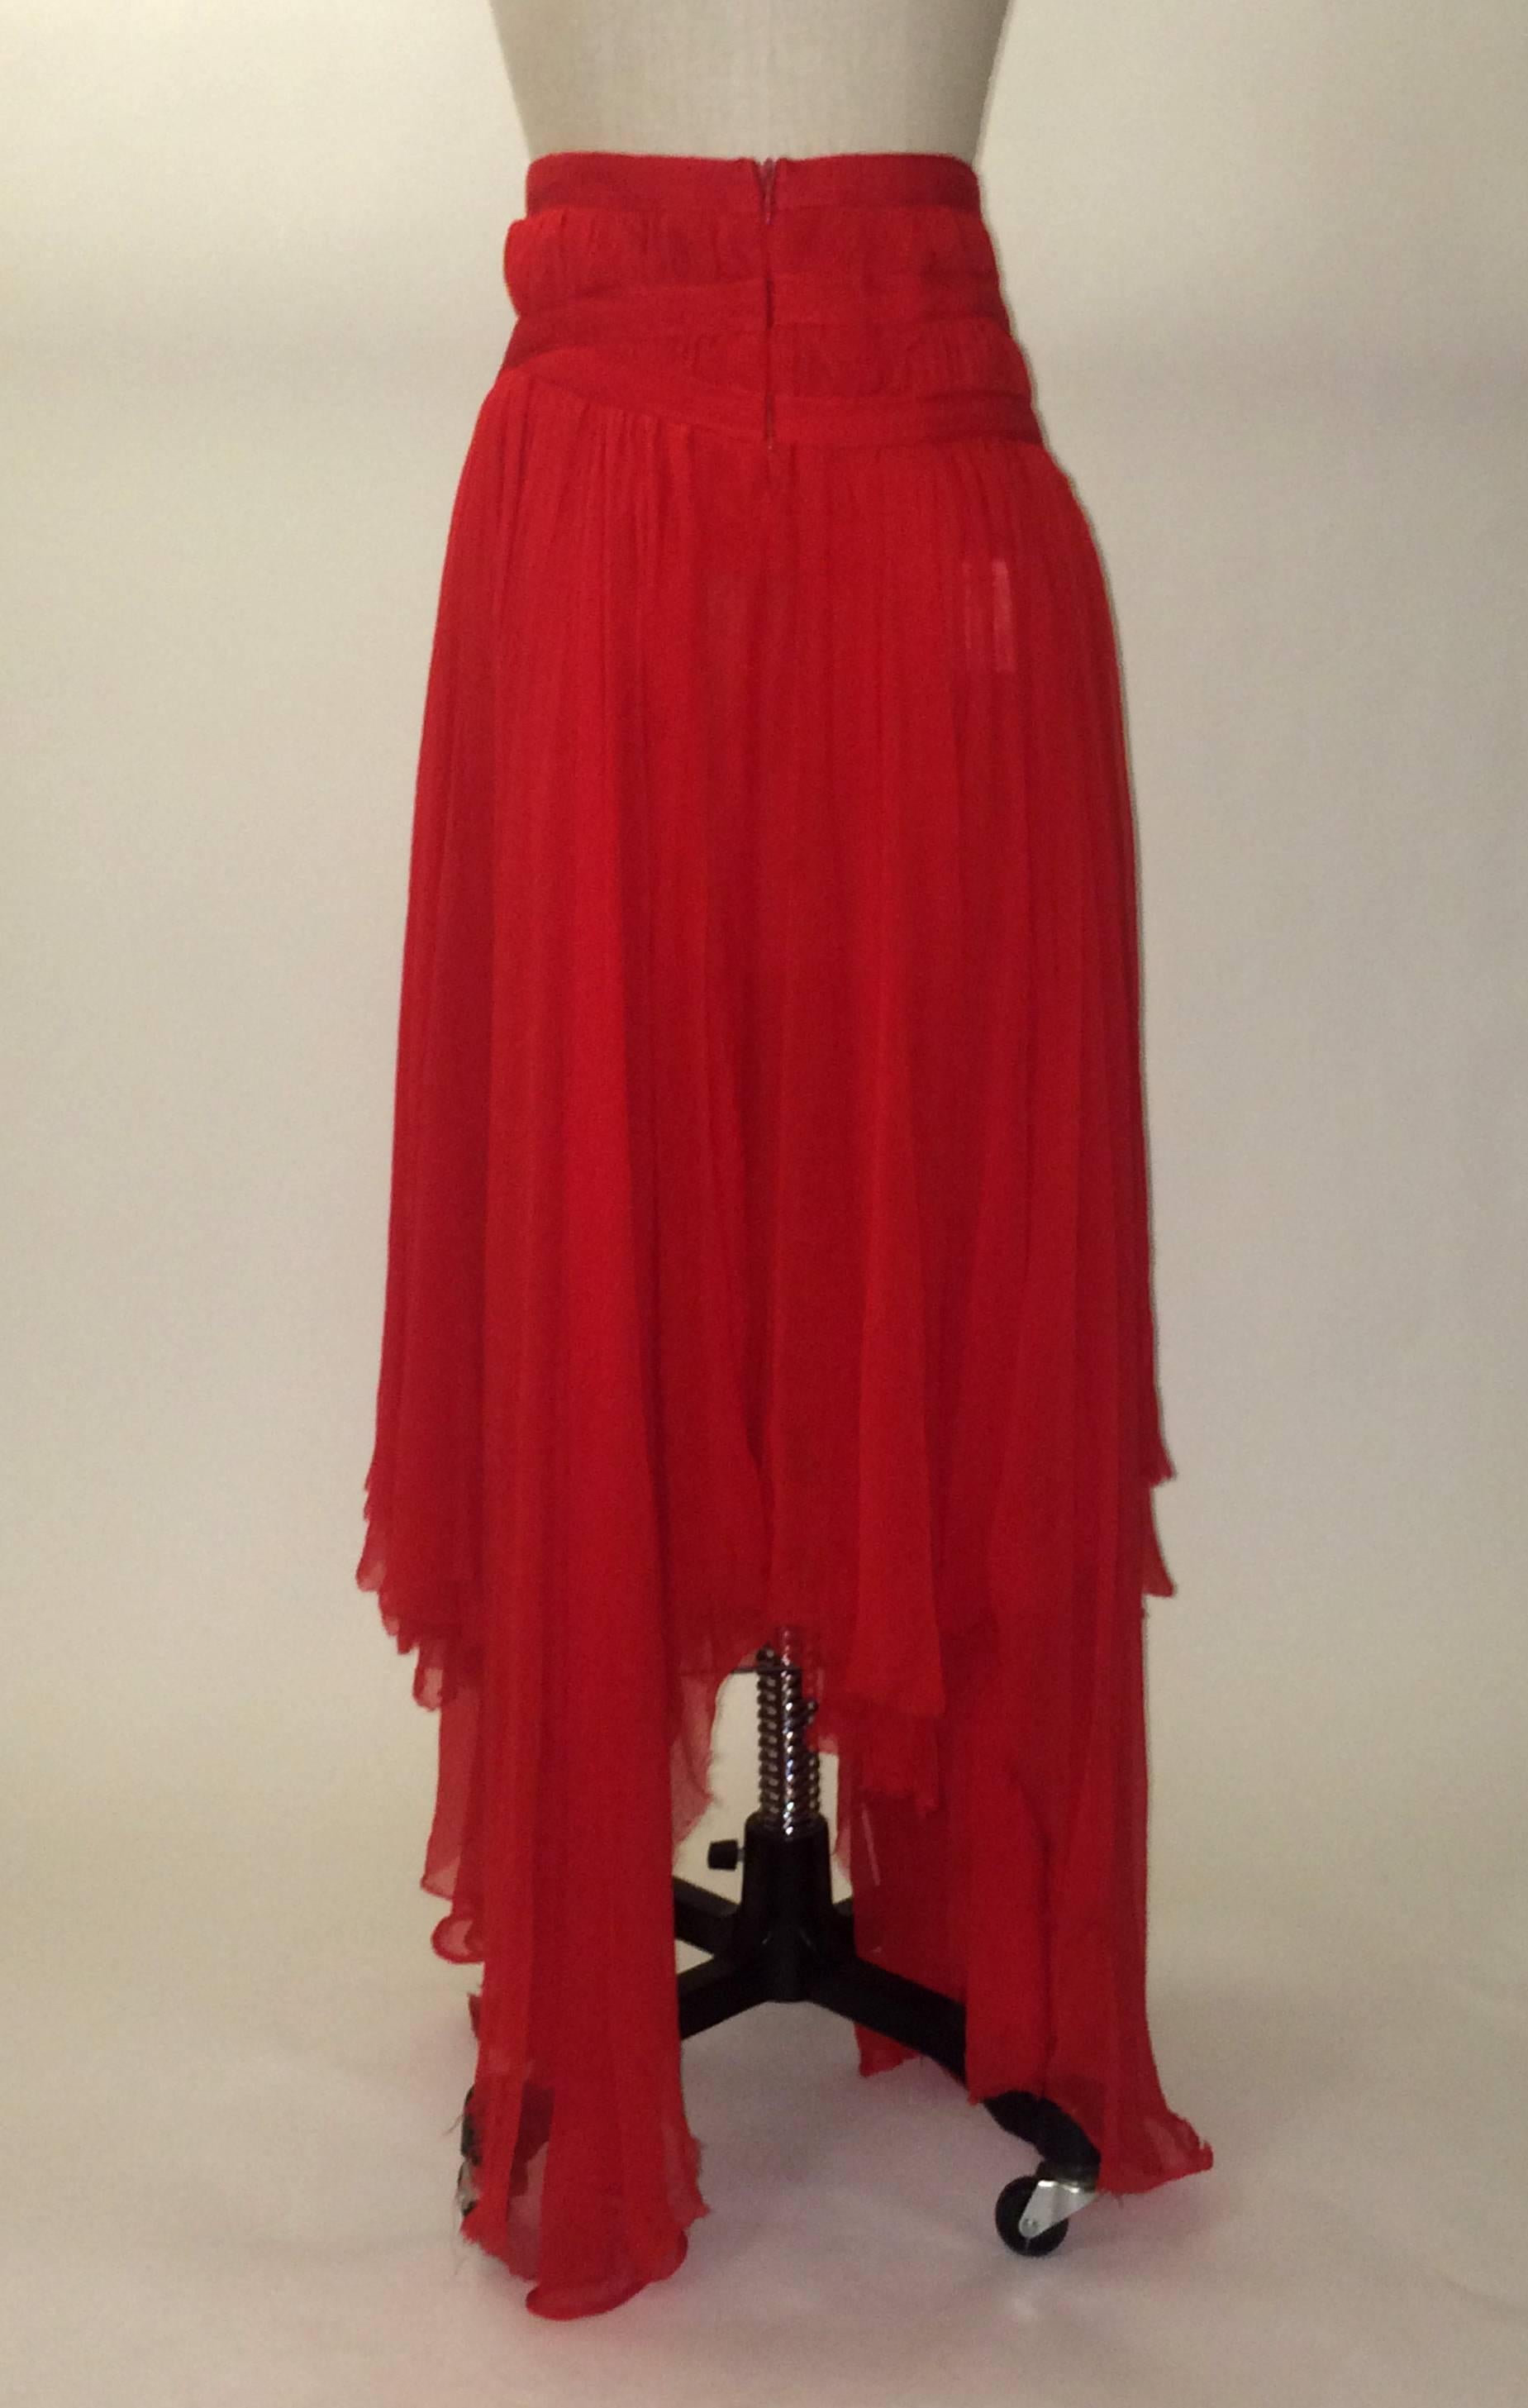 Alexander McQueen flowing red skirt with criss cross straps at hip and asymmetrical (raw edged) distressed hem. Semi sheer, top 8 inches are lined (content tag is visible through fabric, but there seem to be no issues with wearability.) Sits low on